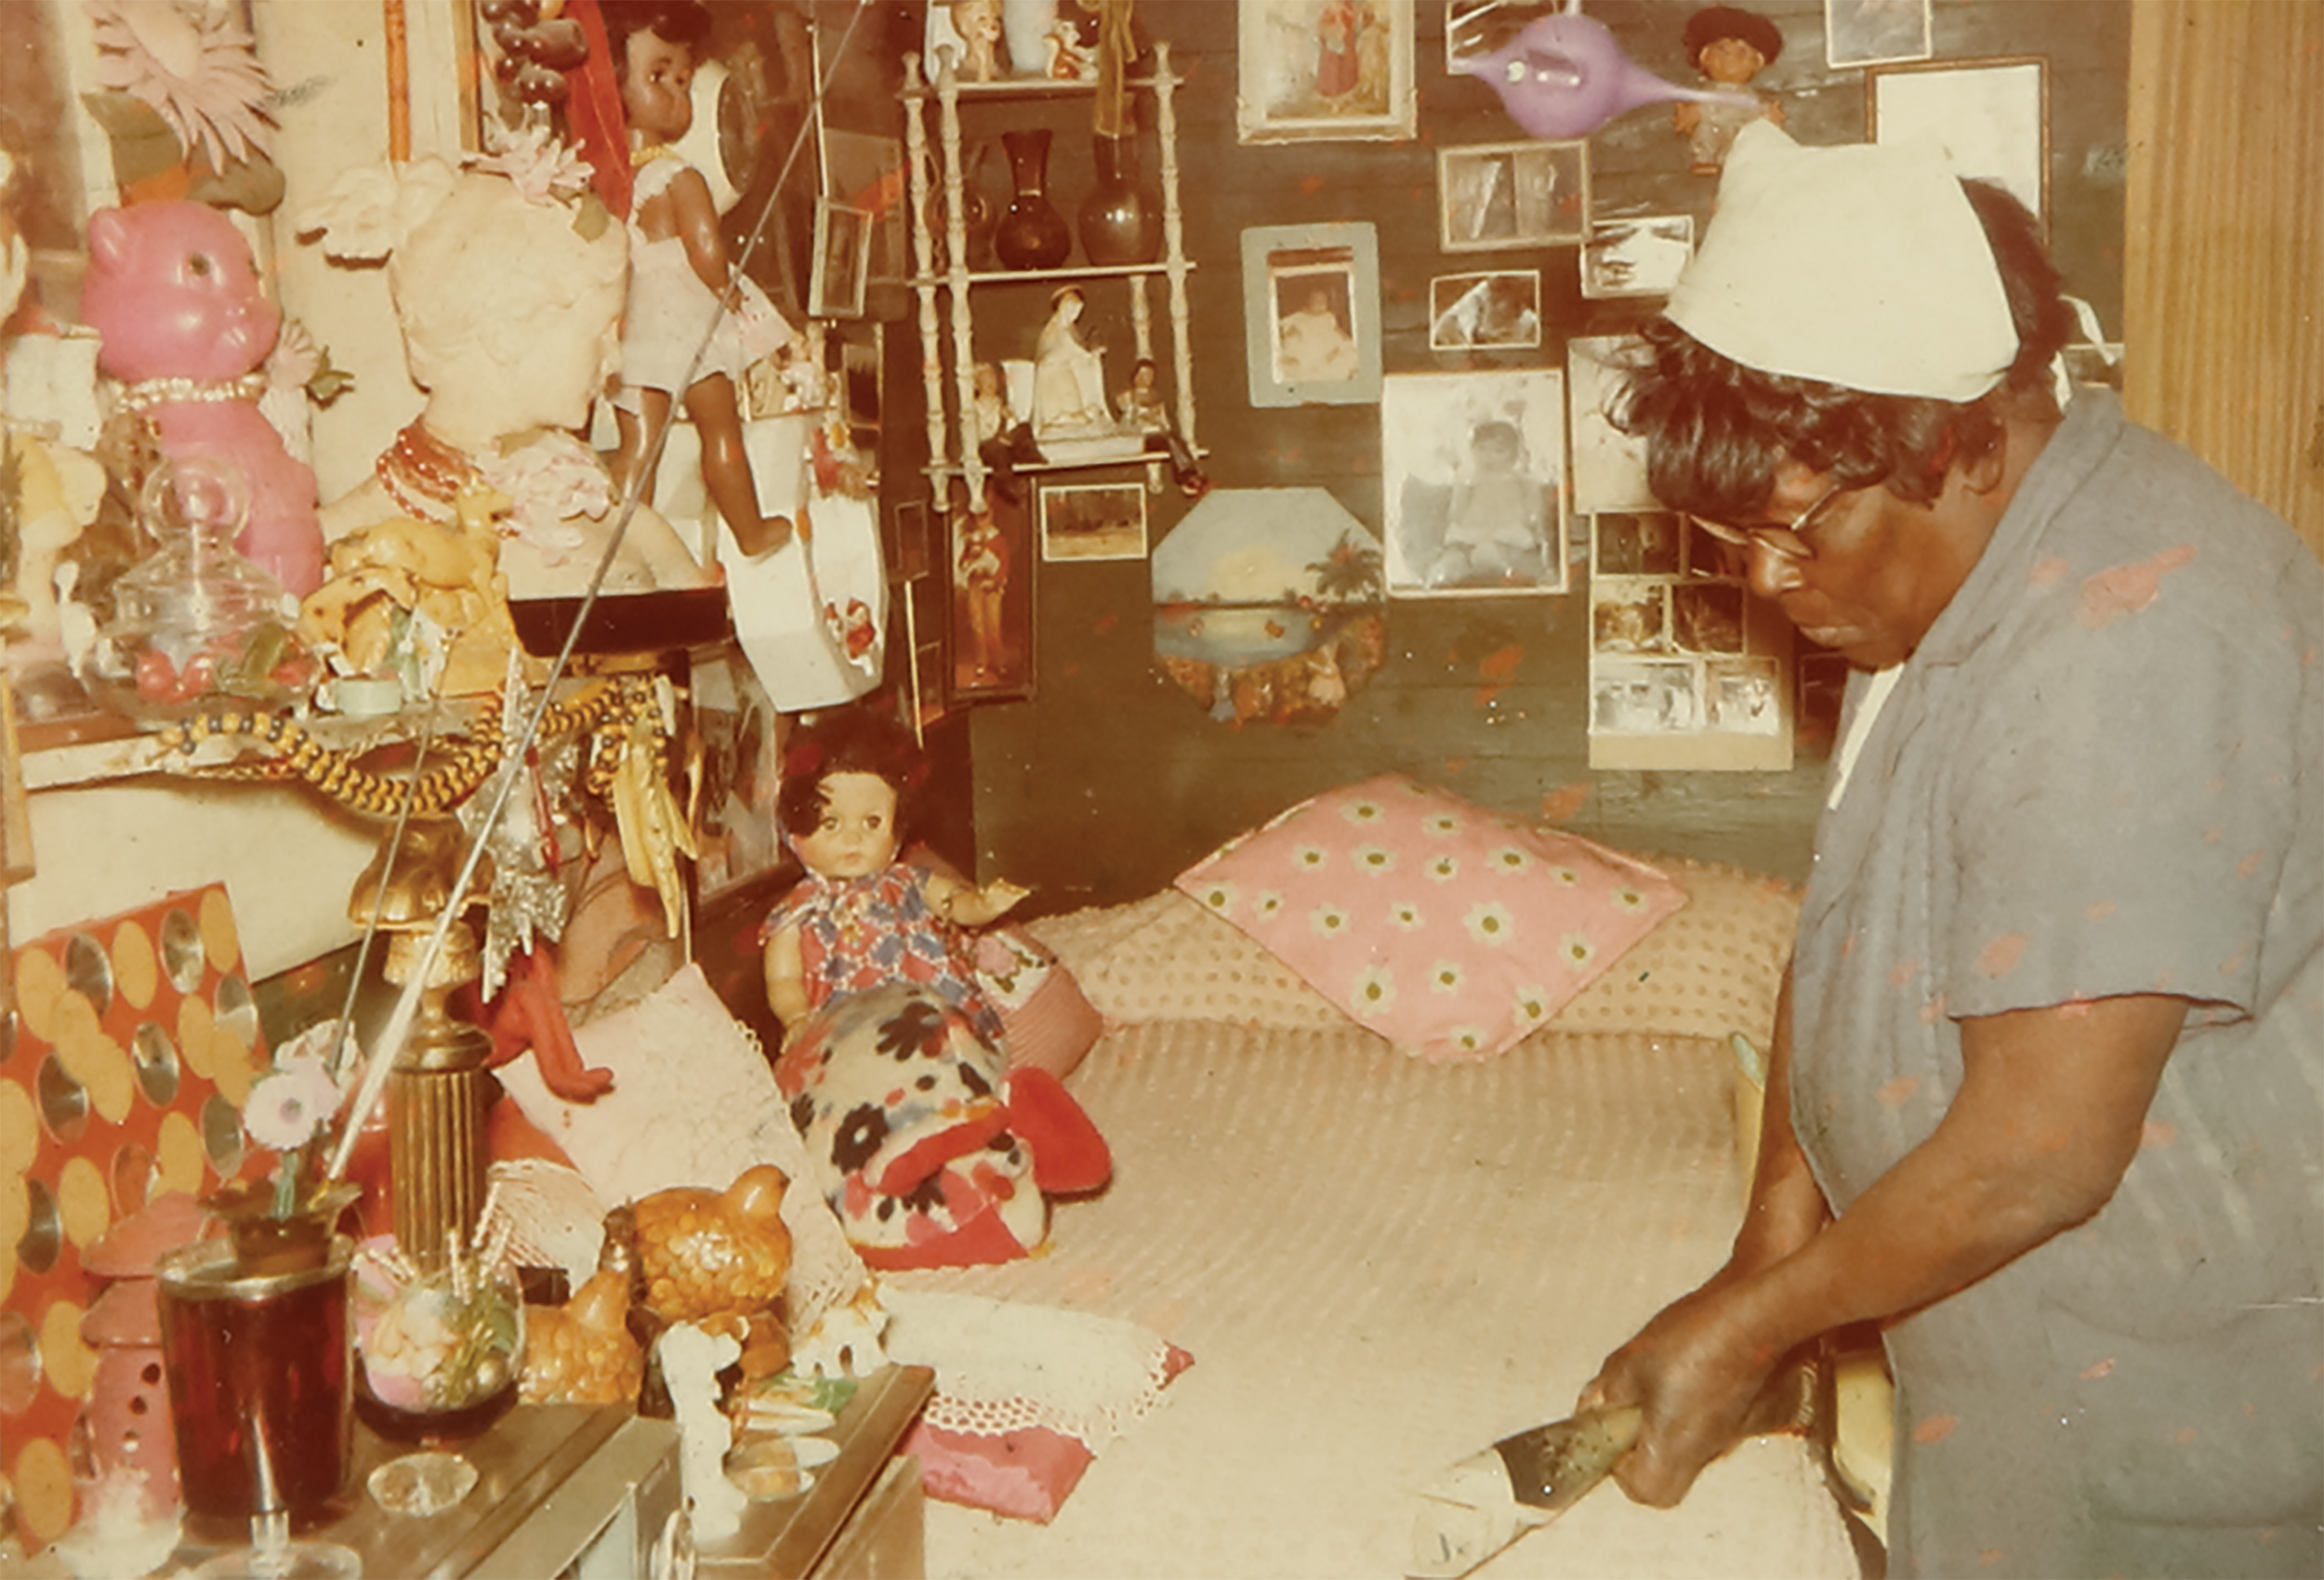 Photograph of Nellie Mae Rowe in a blue dress and white kerchief on her hair standing next to a bed and rolling some paper in her hands. The walls around the bed are heavily decorated with photographs, dolls, beads, and other collectible items.